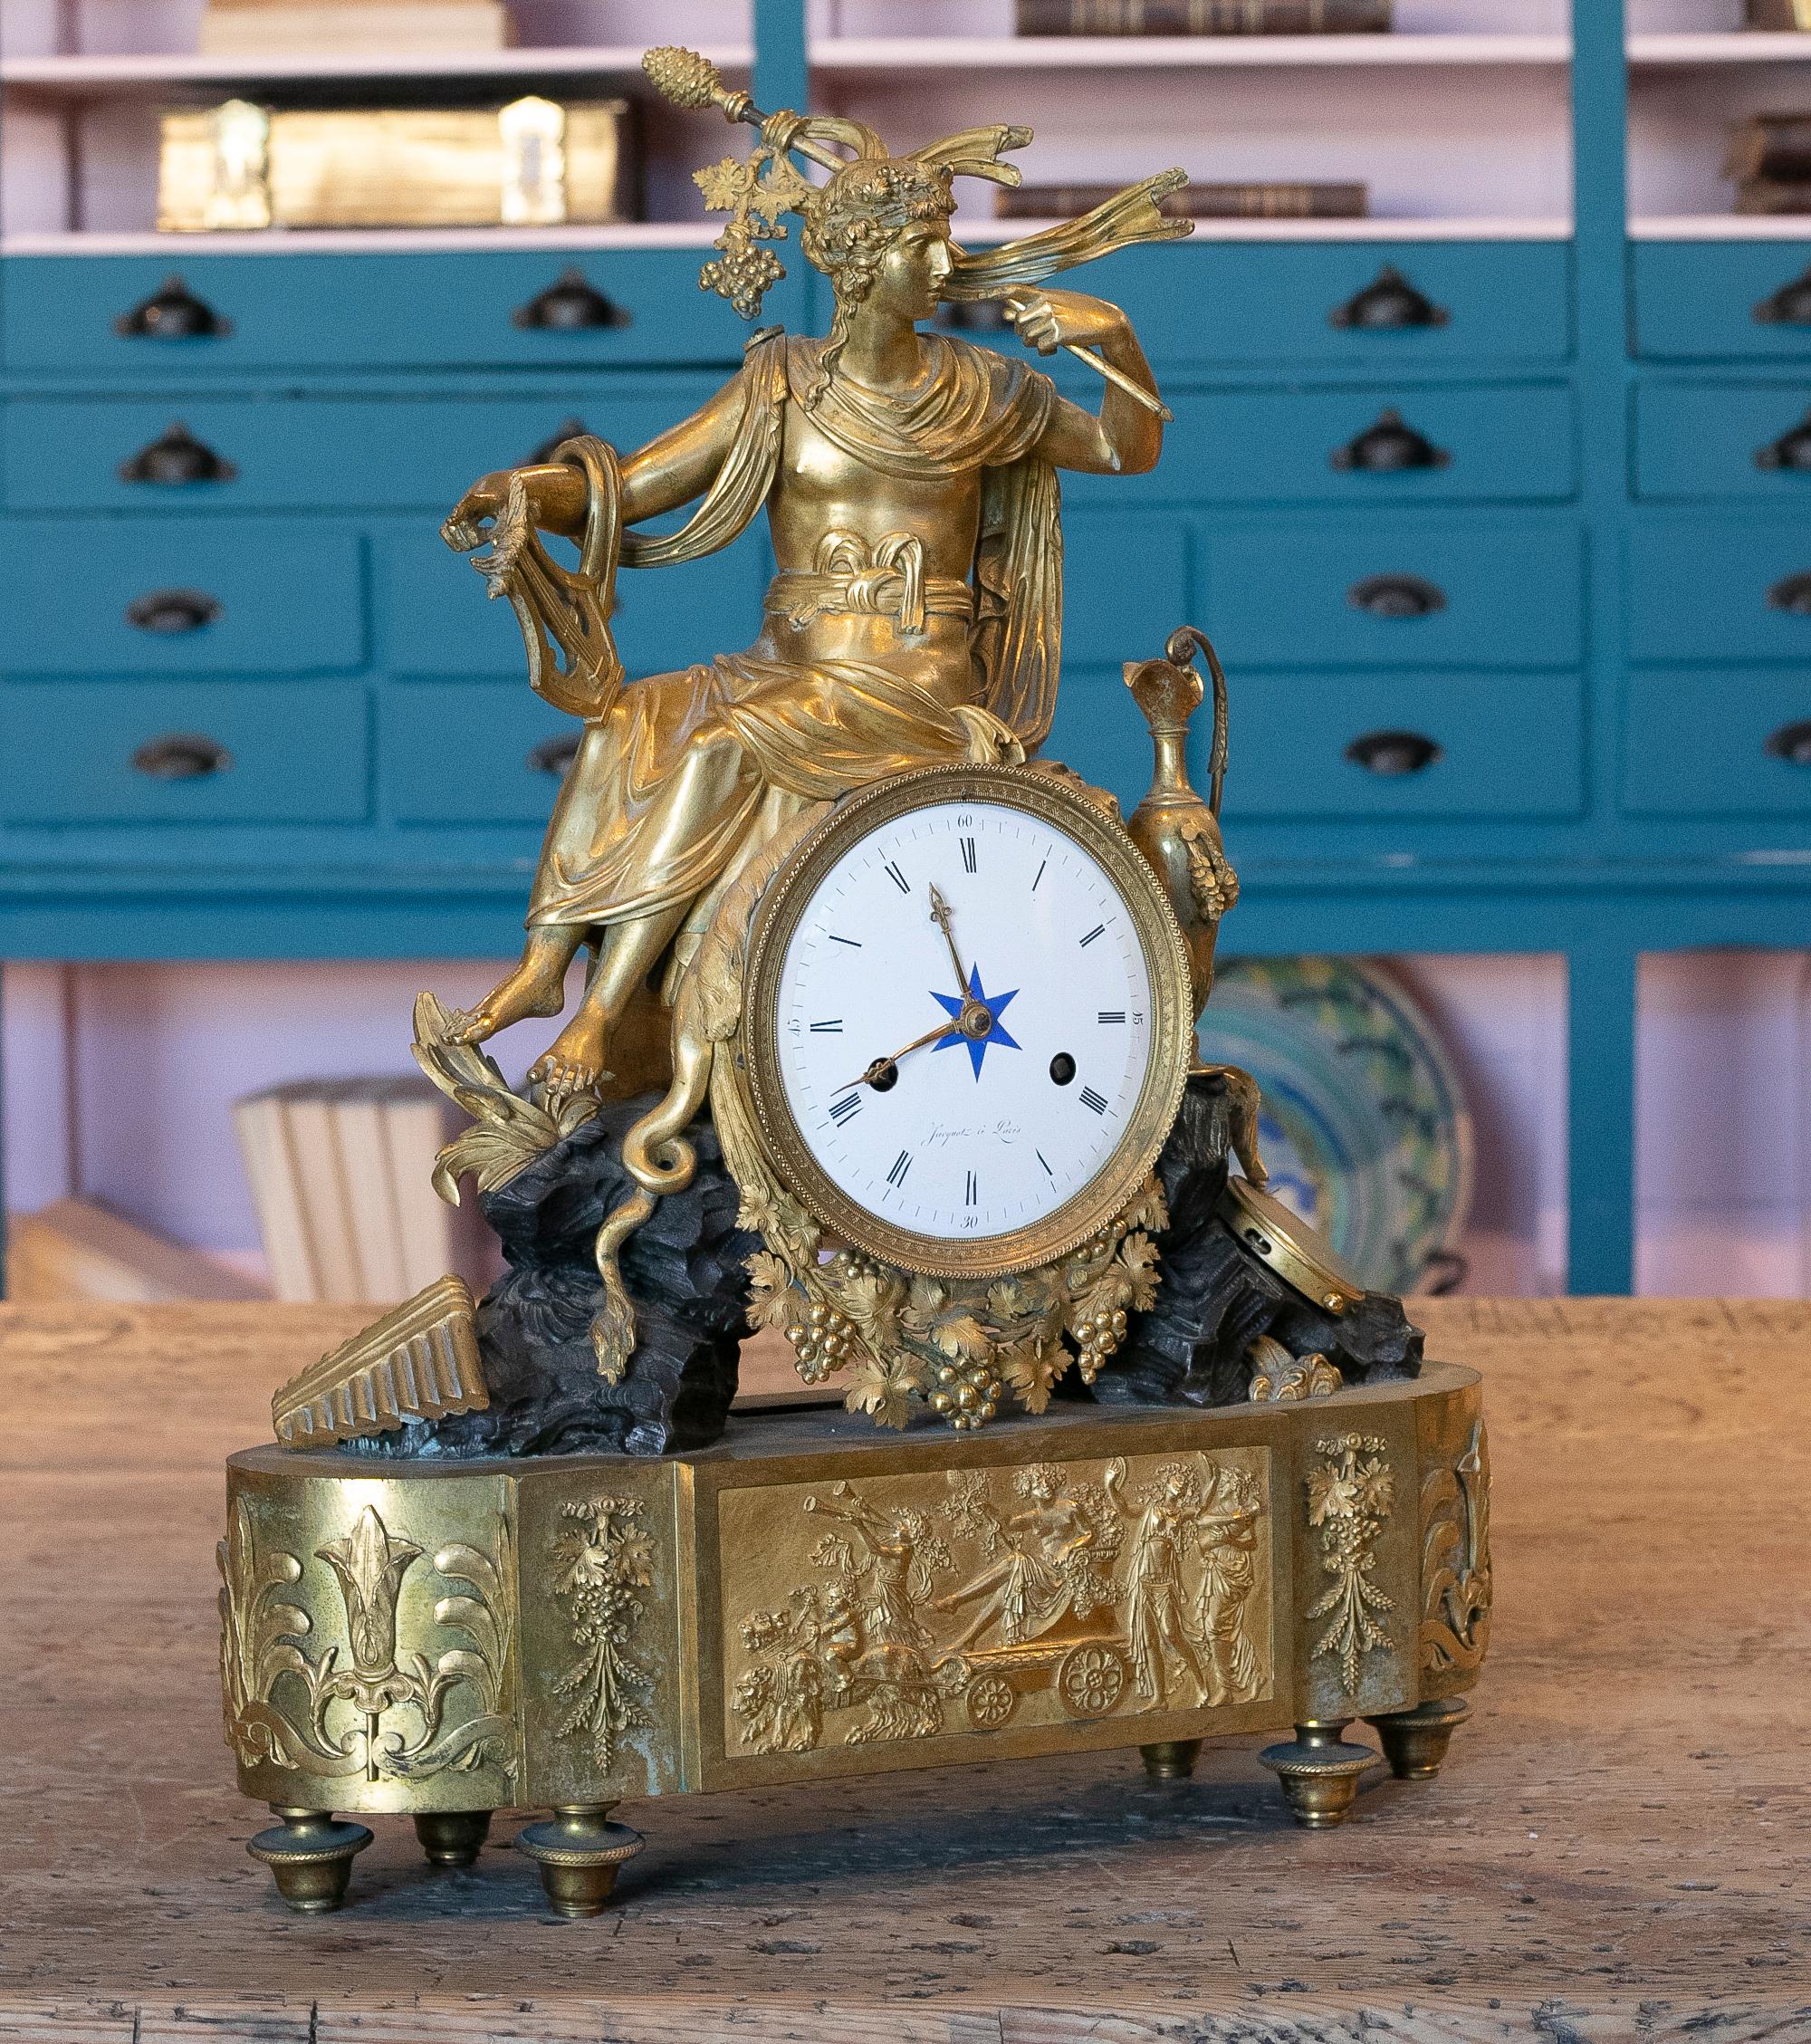 19th century French Empire style gilt bronze mantel (fireplace) clock with the dial inscribed JACQUOT A PARIS.
  